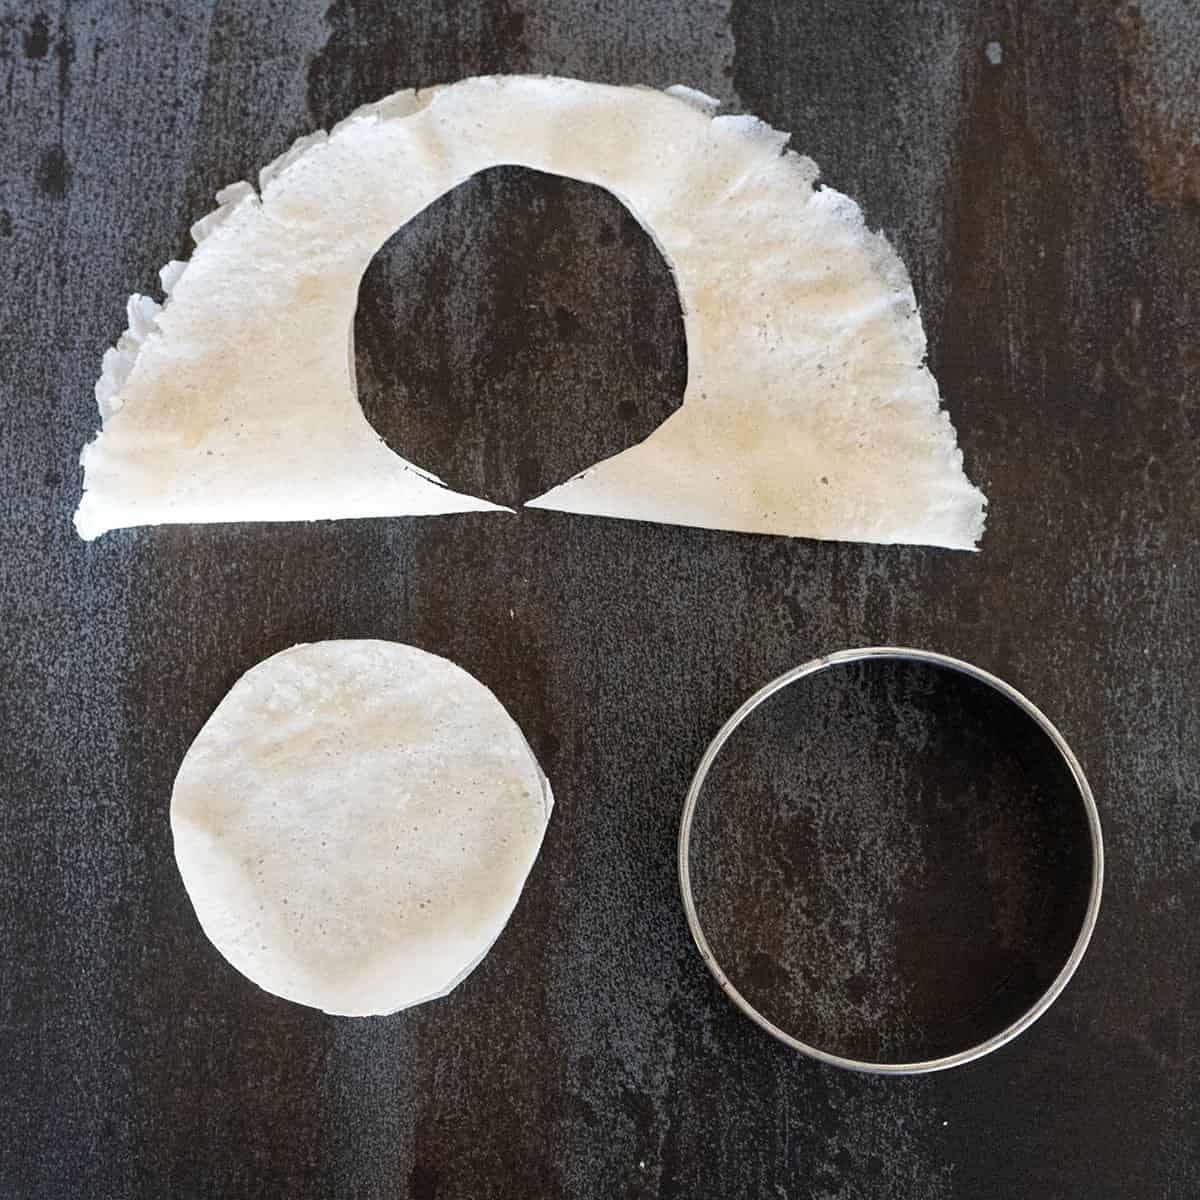 Small circle cut out of lumpia wrapper.